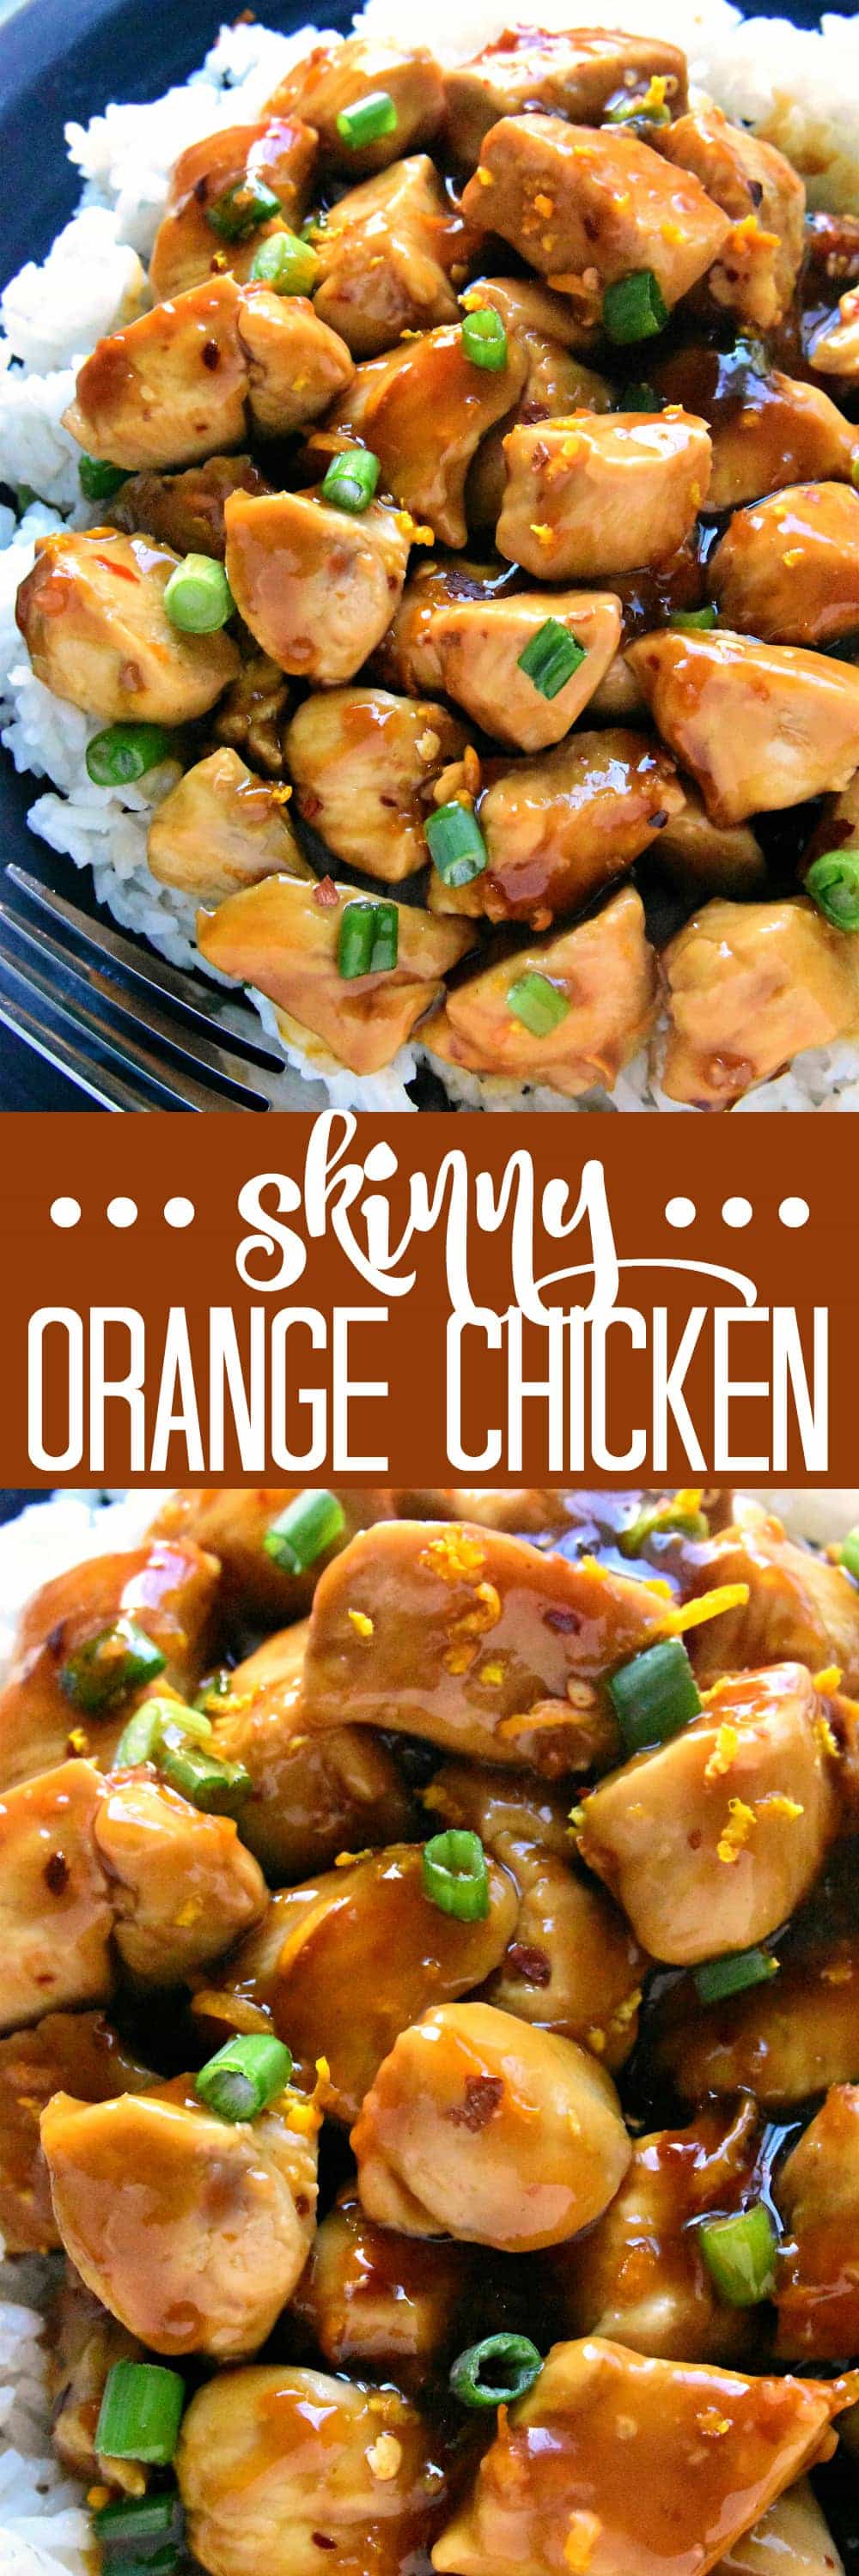 Skinny Orange Chicken - a delicious, lightened up version of your favorite takeout! This recipe comes together in 30 minutes or less and is guaranteed to satisfy the whole family!